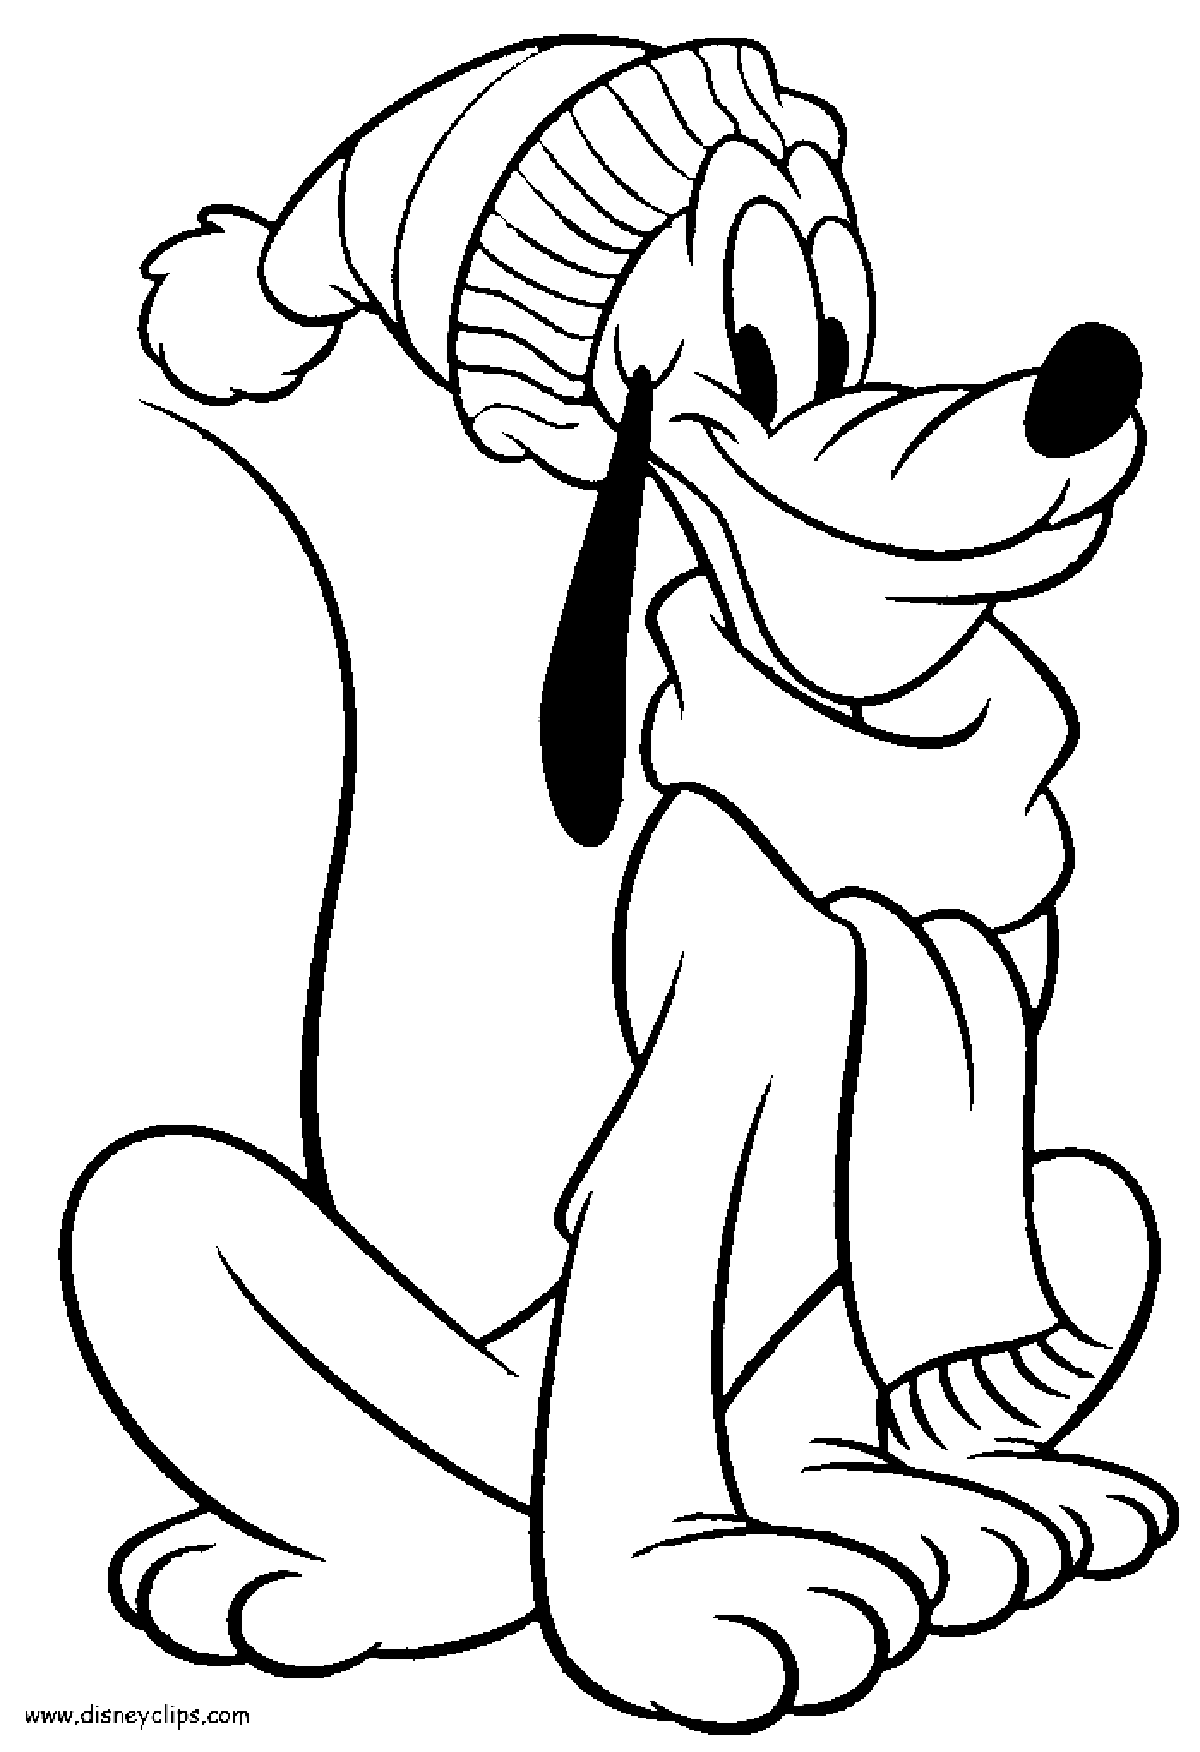 Getting Ready for Christmas Pluto Coloring Page